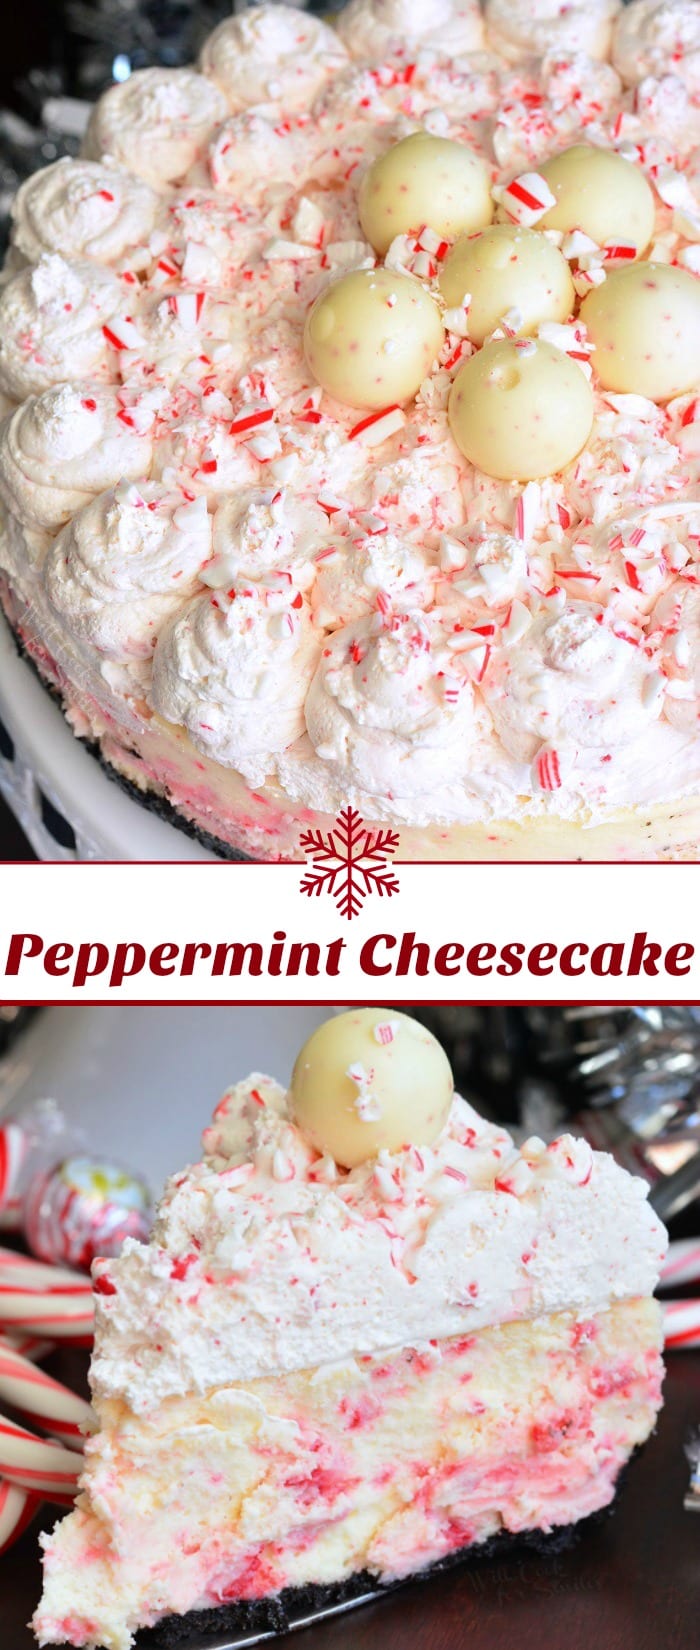 Peppermint Cheesecake collage with a cheesecake slice 